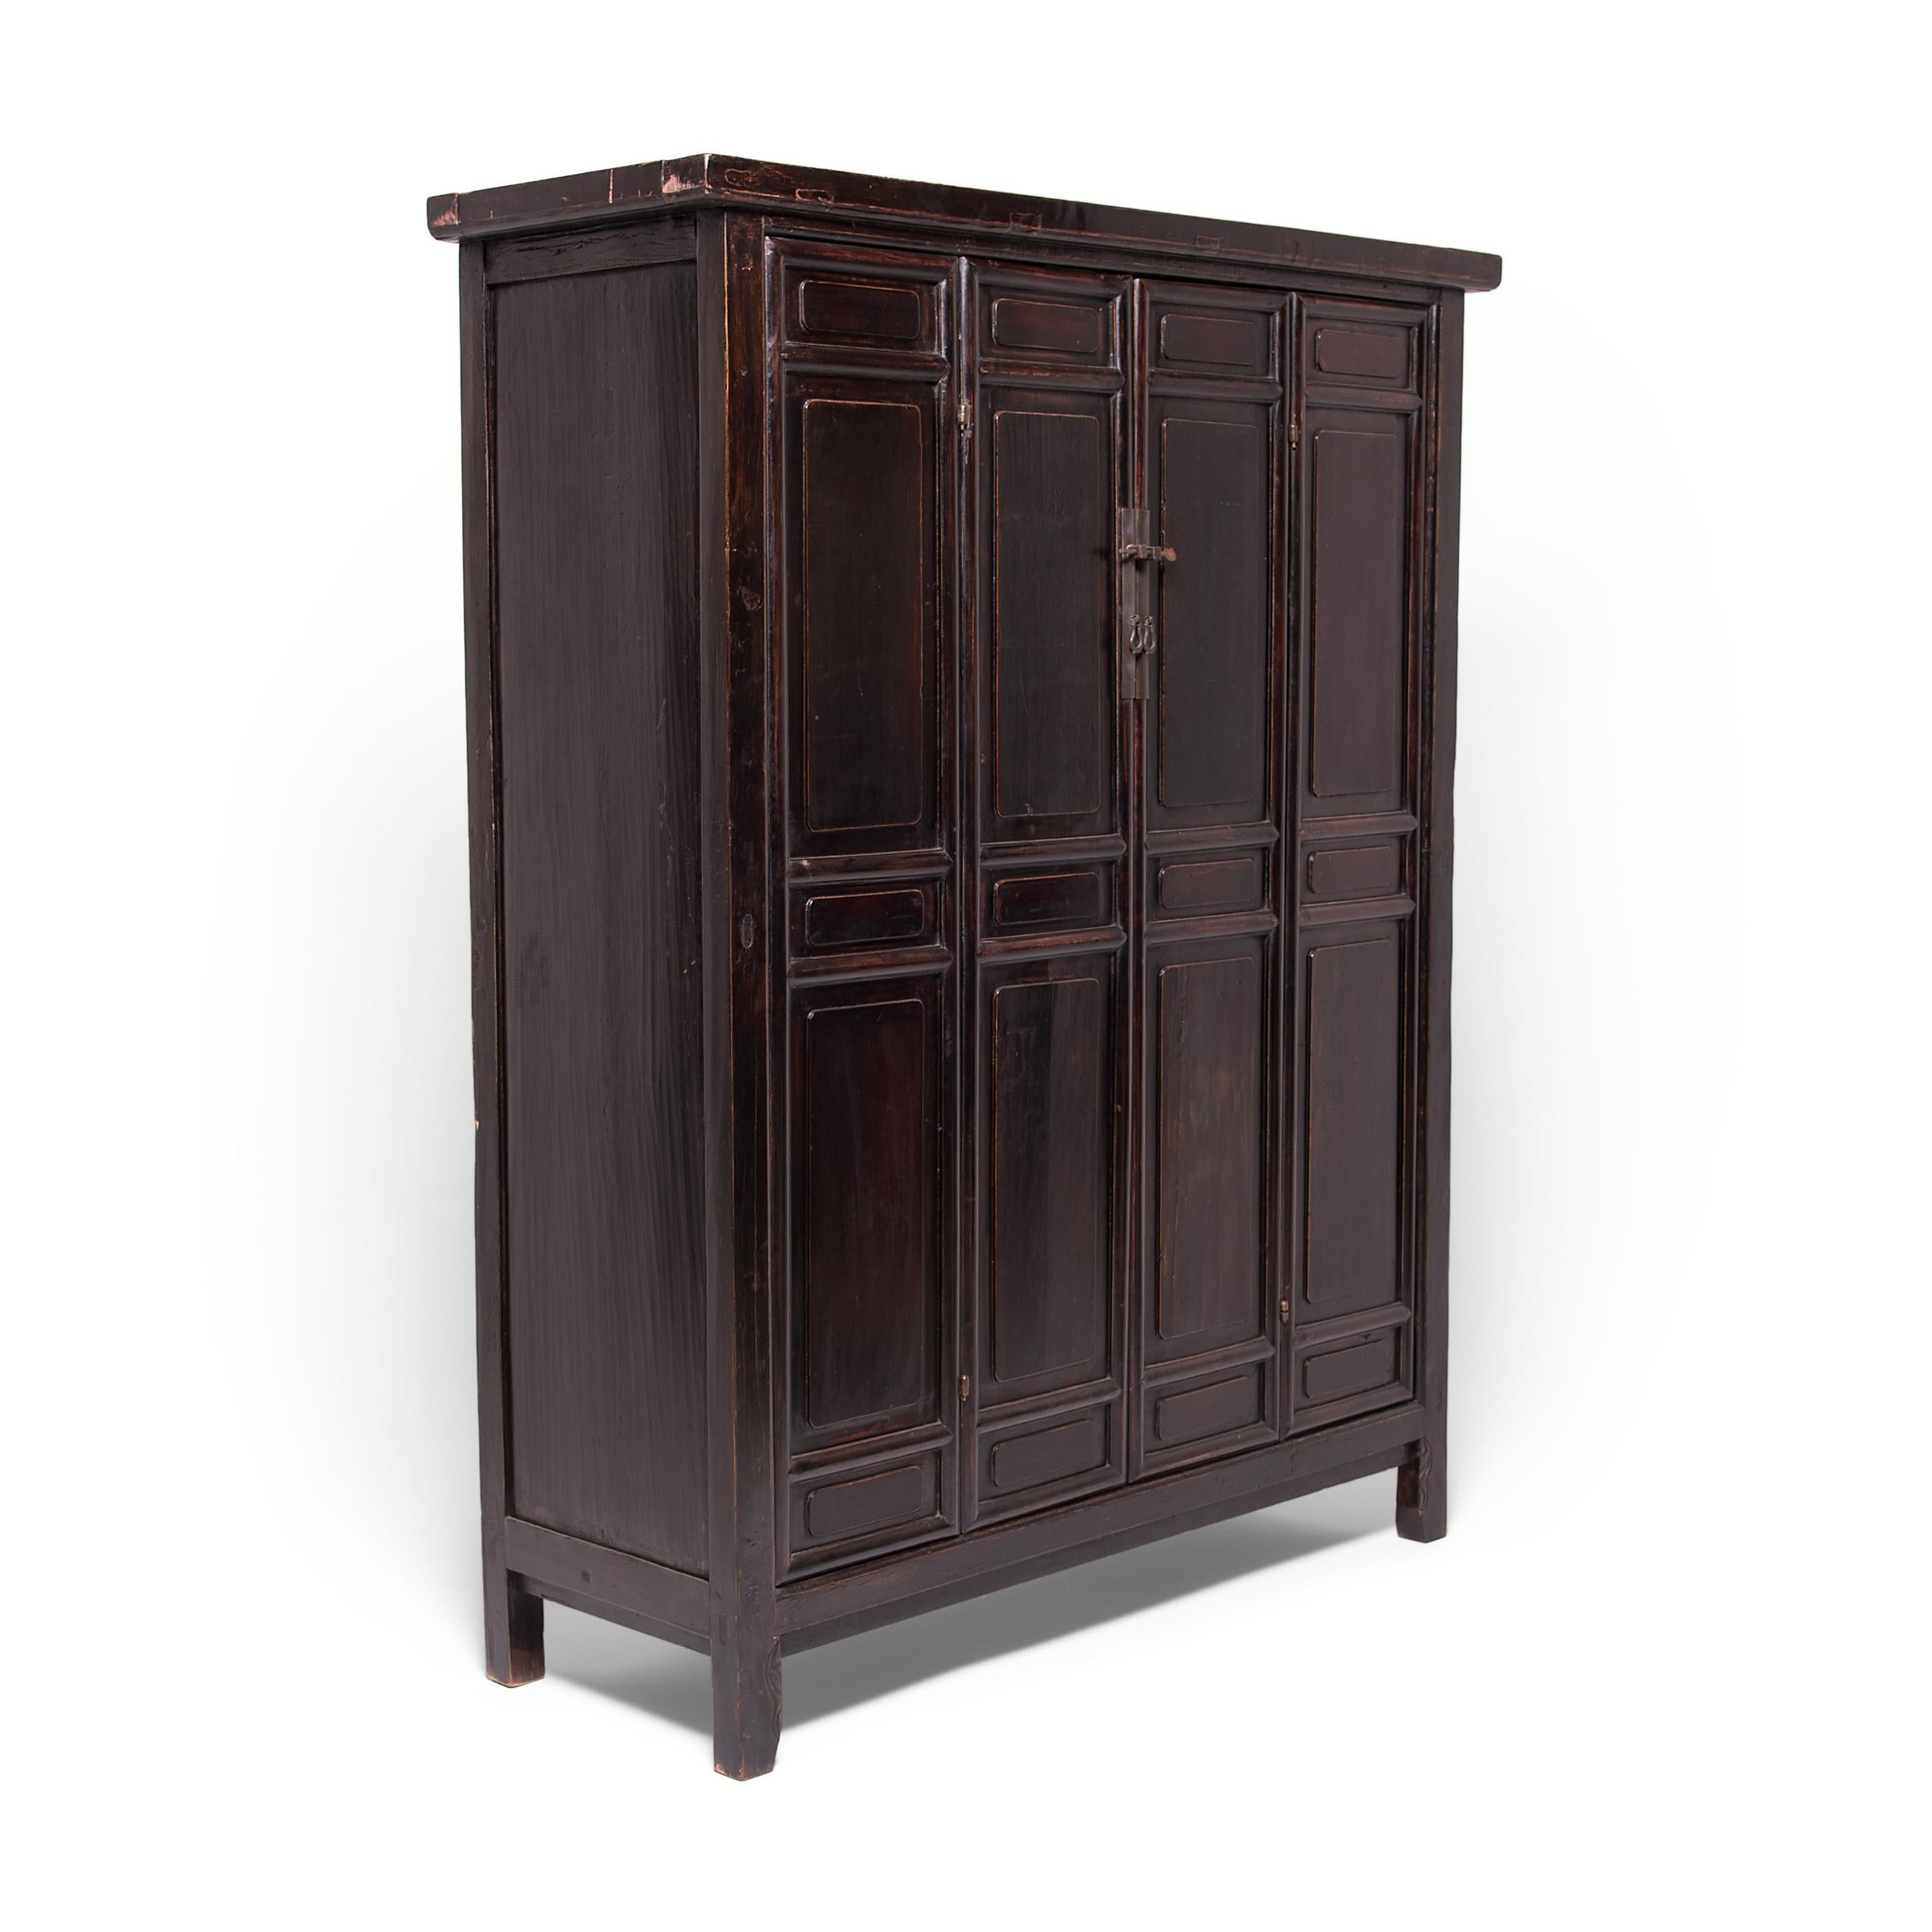 Qing Chinese Four Panel Cabinet, c. 1850